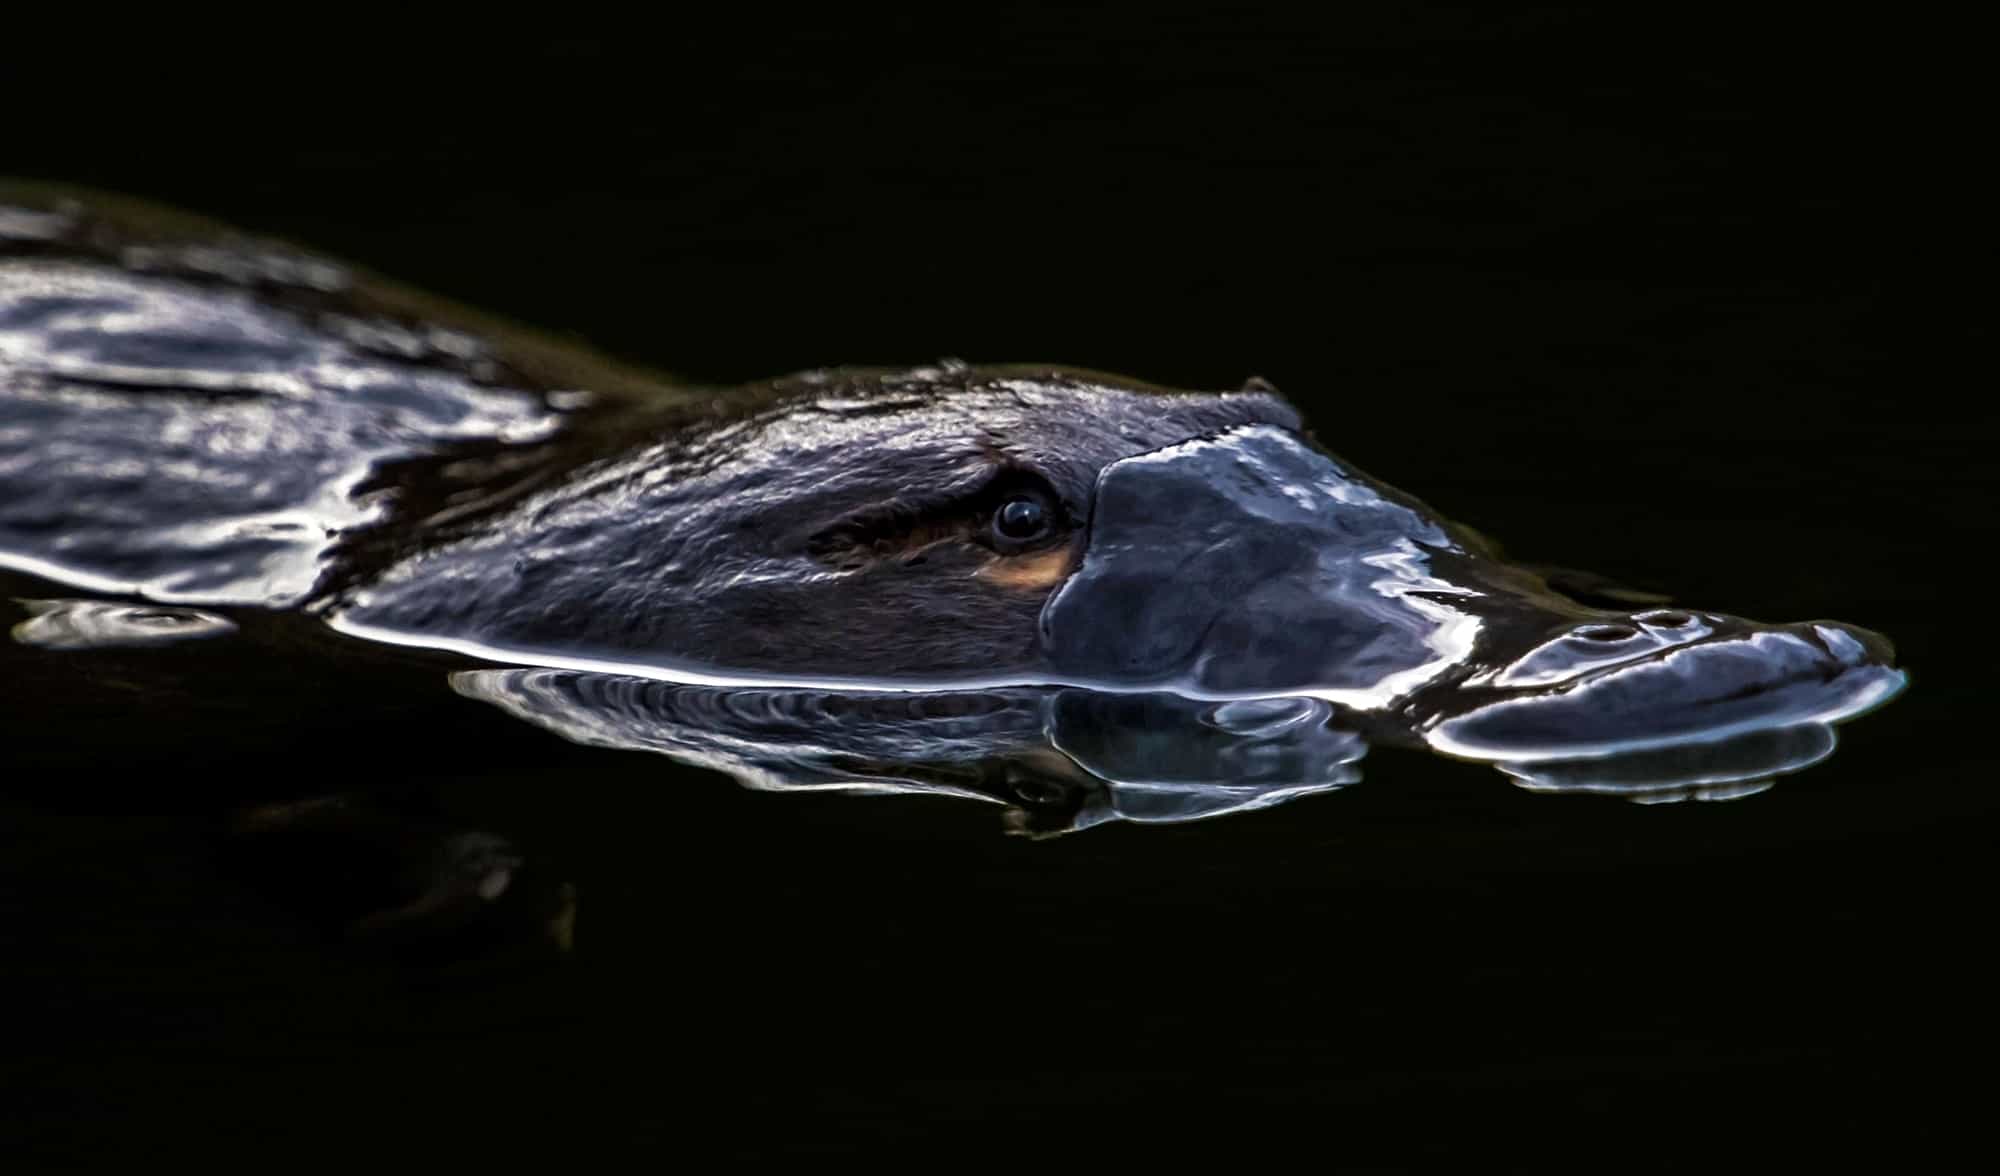 The puzzle of the platypus: could time be up for this iconic Aussie animal?